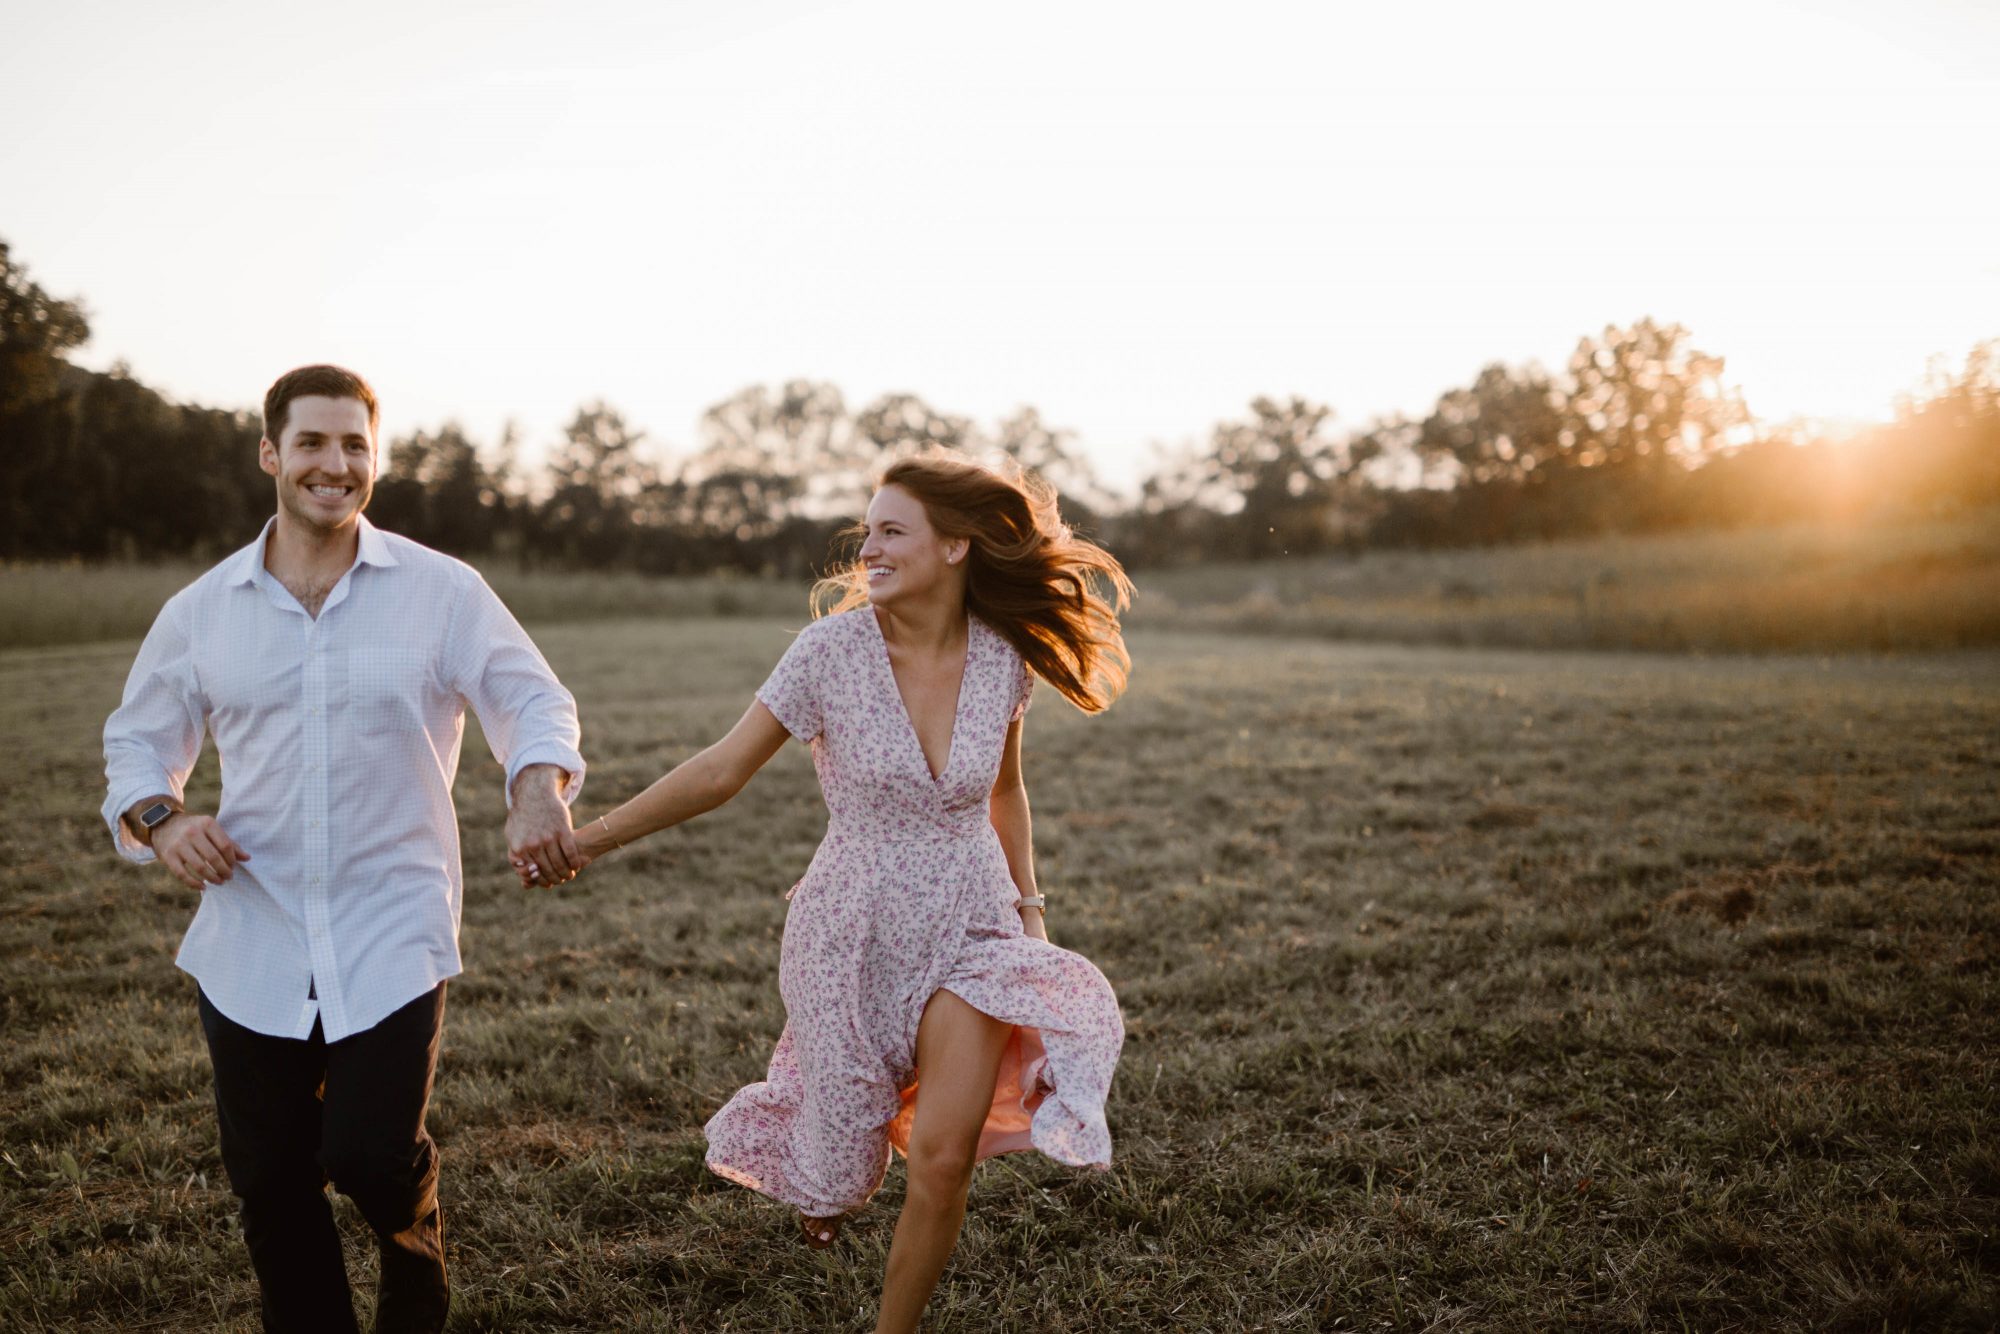 Why You Should Take Engagement Photos